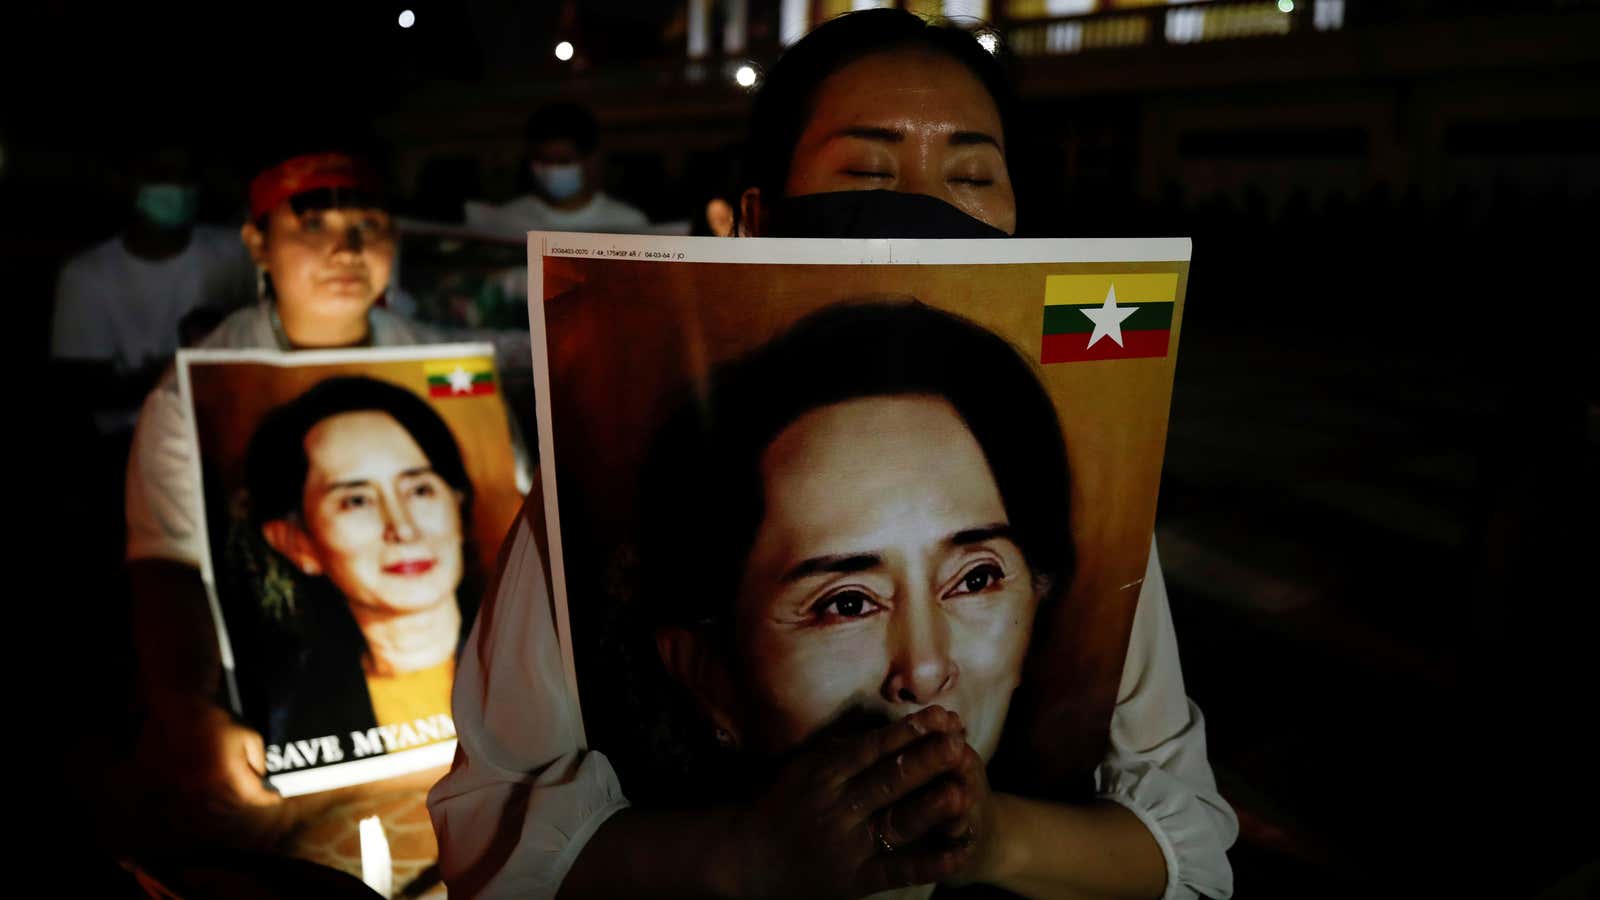 Protesters in Bangkok holding pictures of ousted Myanmar leader Aung San Suu Kyi at a candlelight vigil on March 28, 2021.